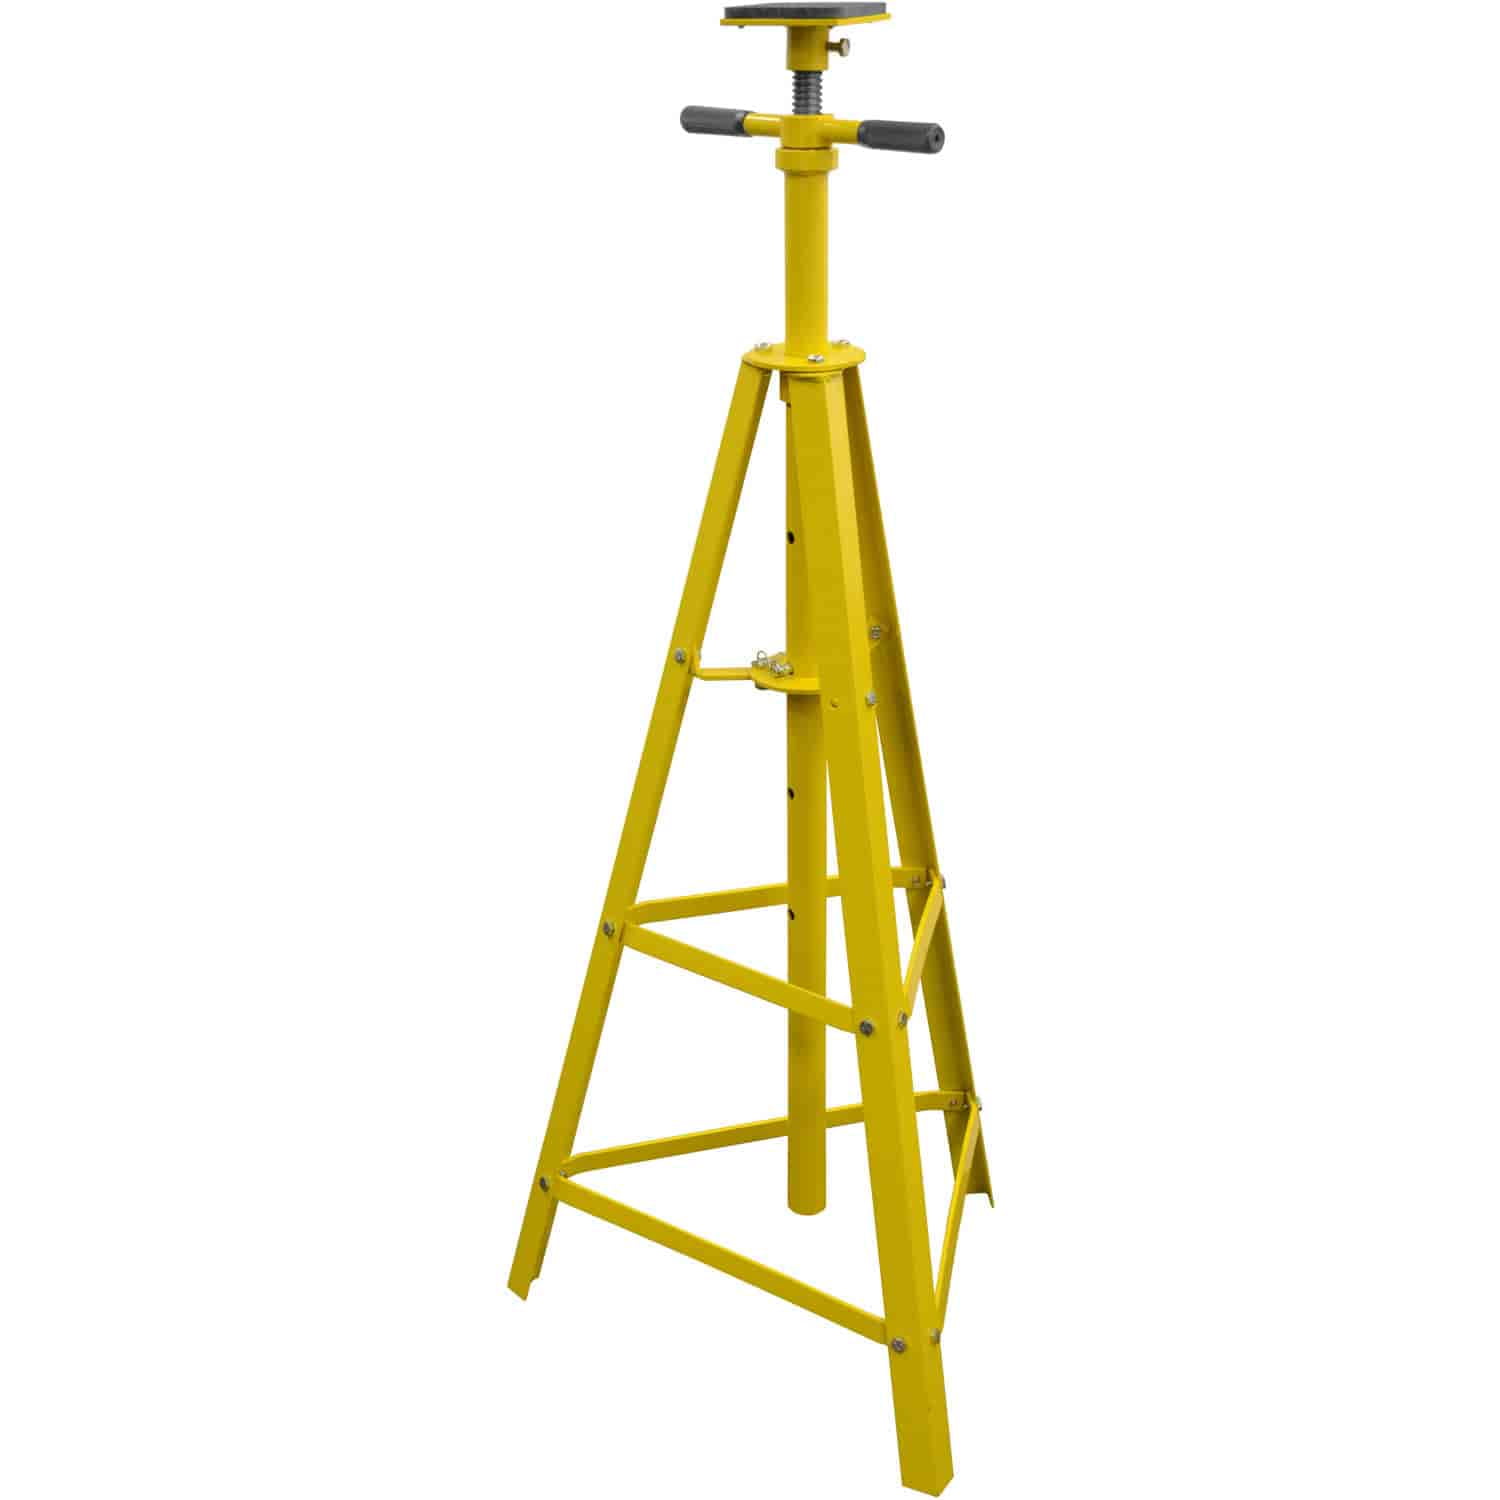 Adjustable JEGS 80013 2-Ton Capacity High Lift Jack Stand 49 to 80 